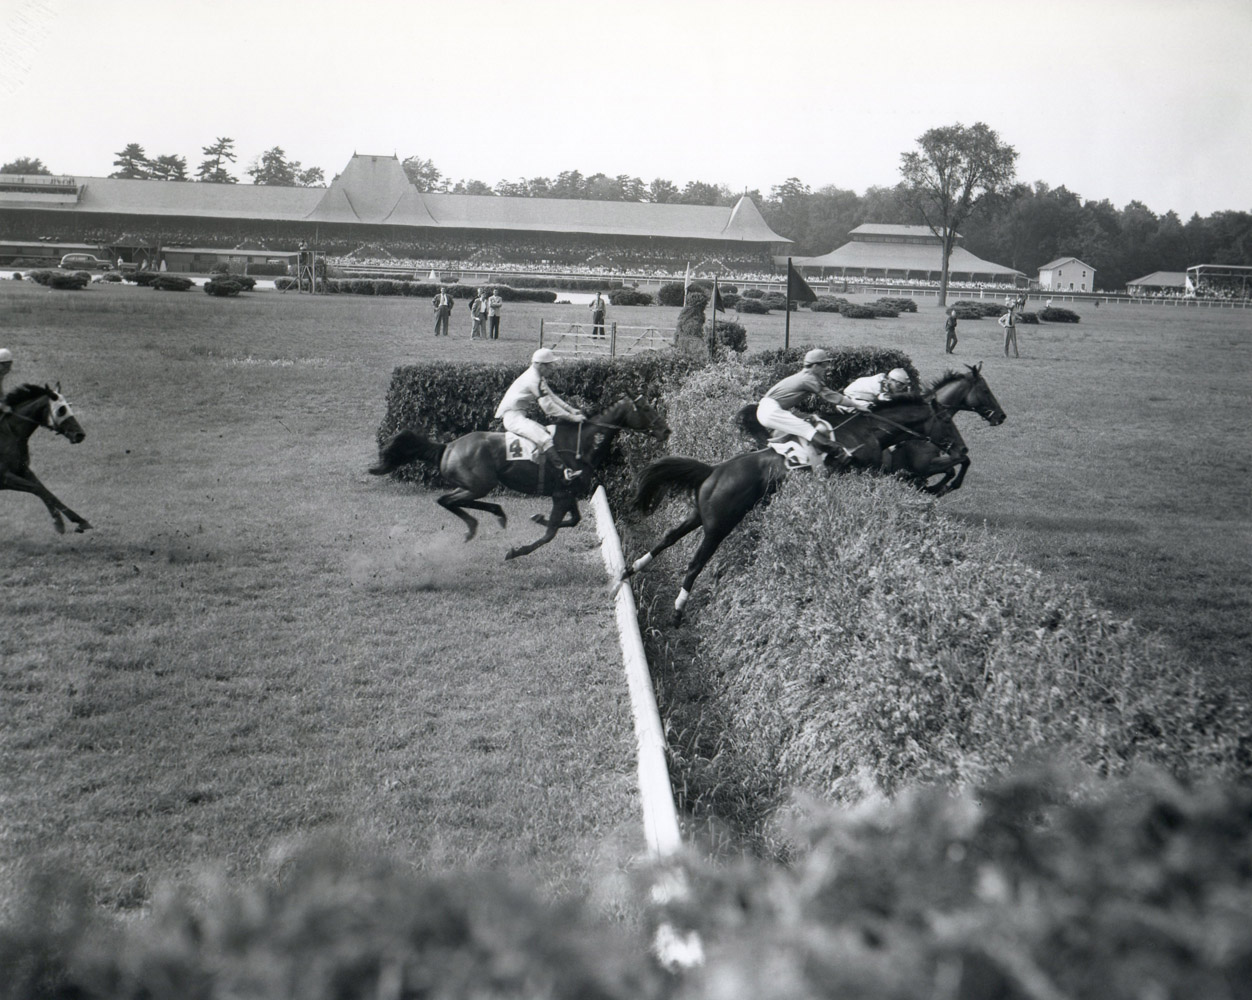 Oedipus competing in the1950 Saratoga Handicap Steeplechase with Thomas Field up (Keeneland Library Morgan Collection/Museum Collection)